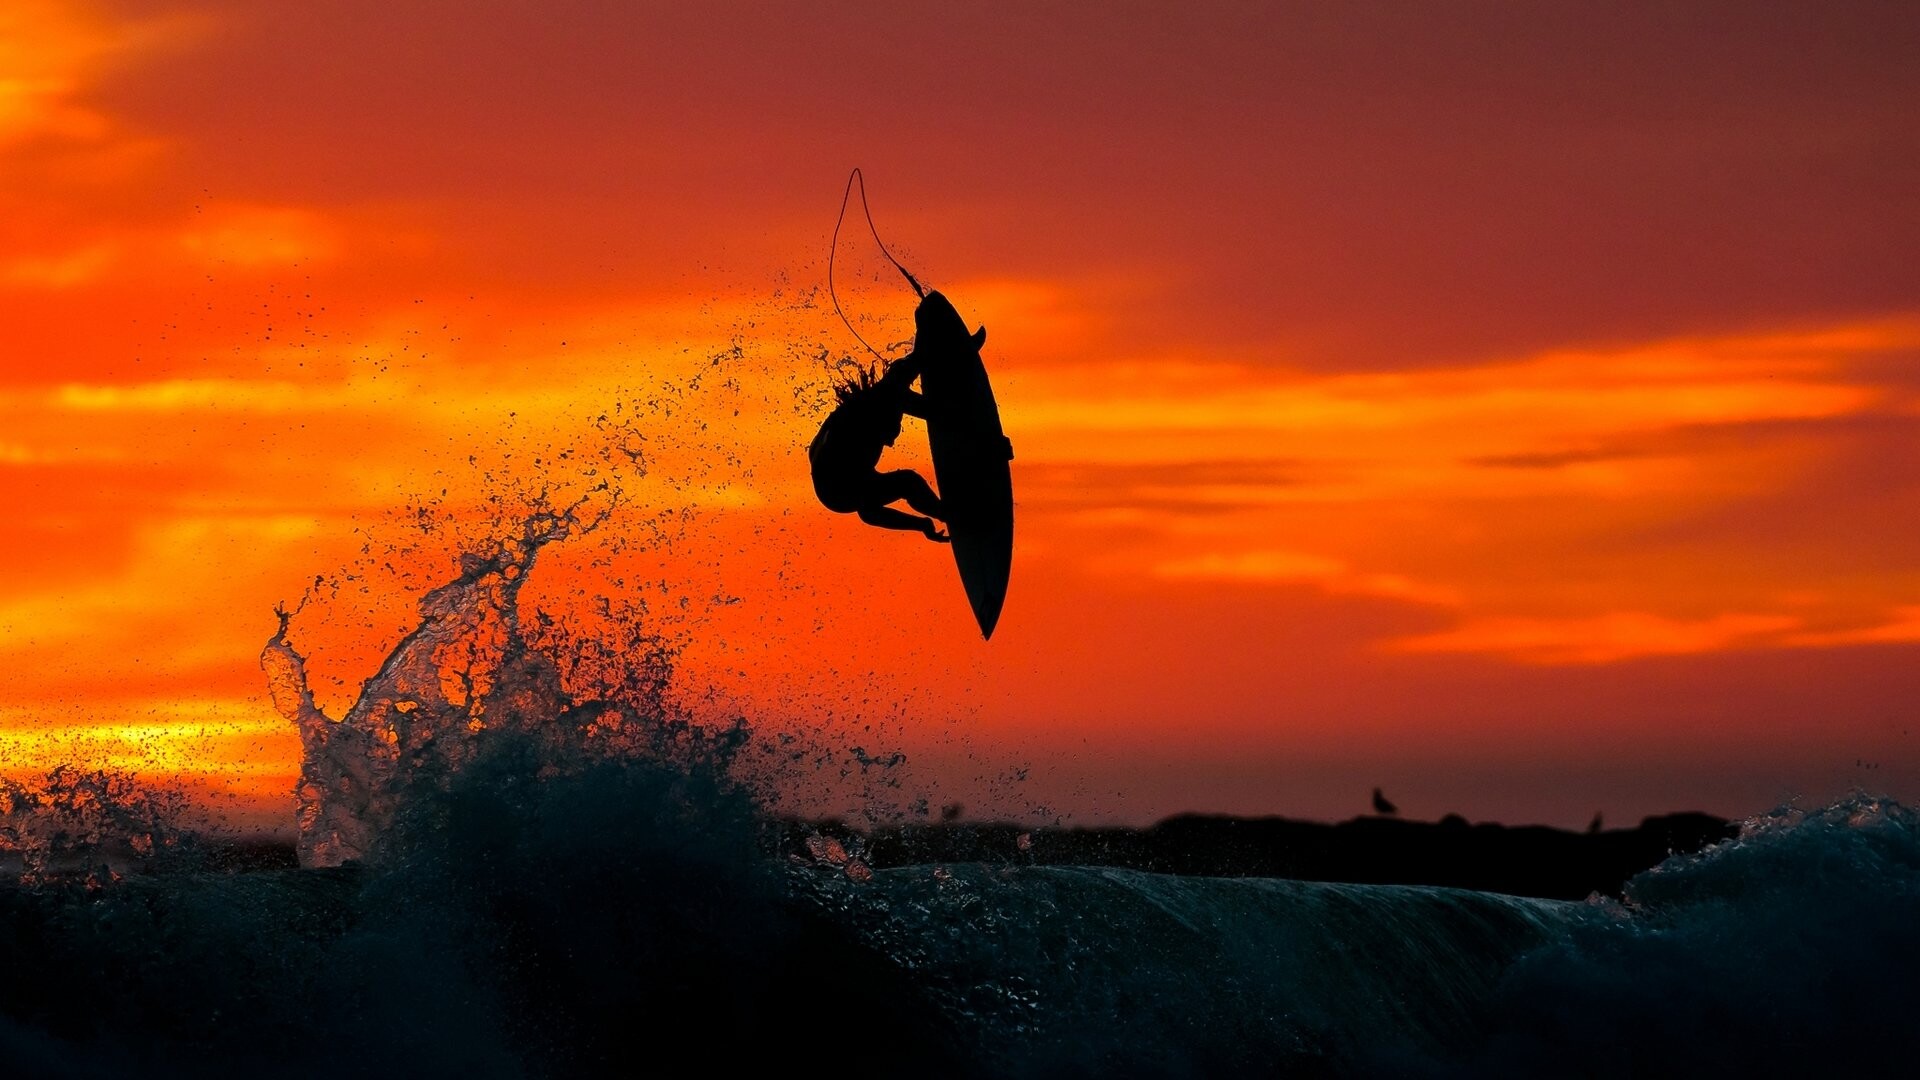 Girl Surfing: Recreational water sports in the sunset, Short boarding in extreme conditions. 1920x1080 Full HD Wallpaper.